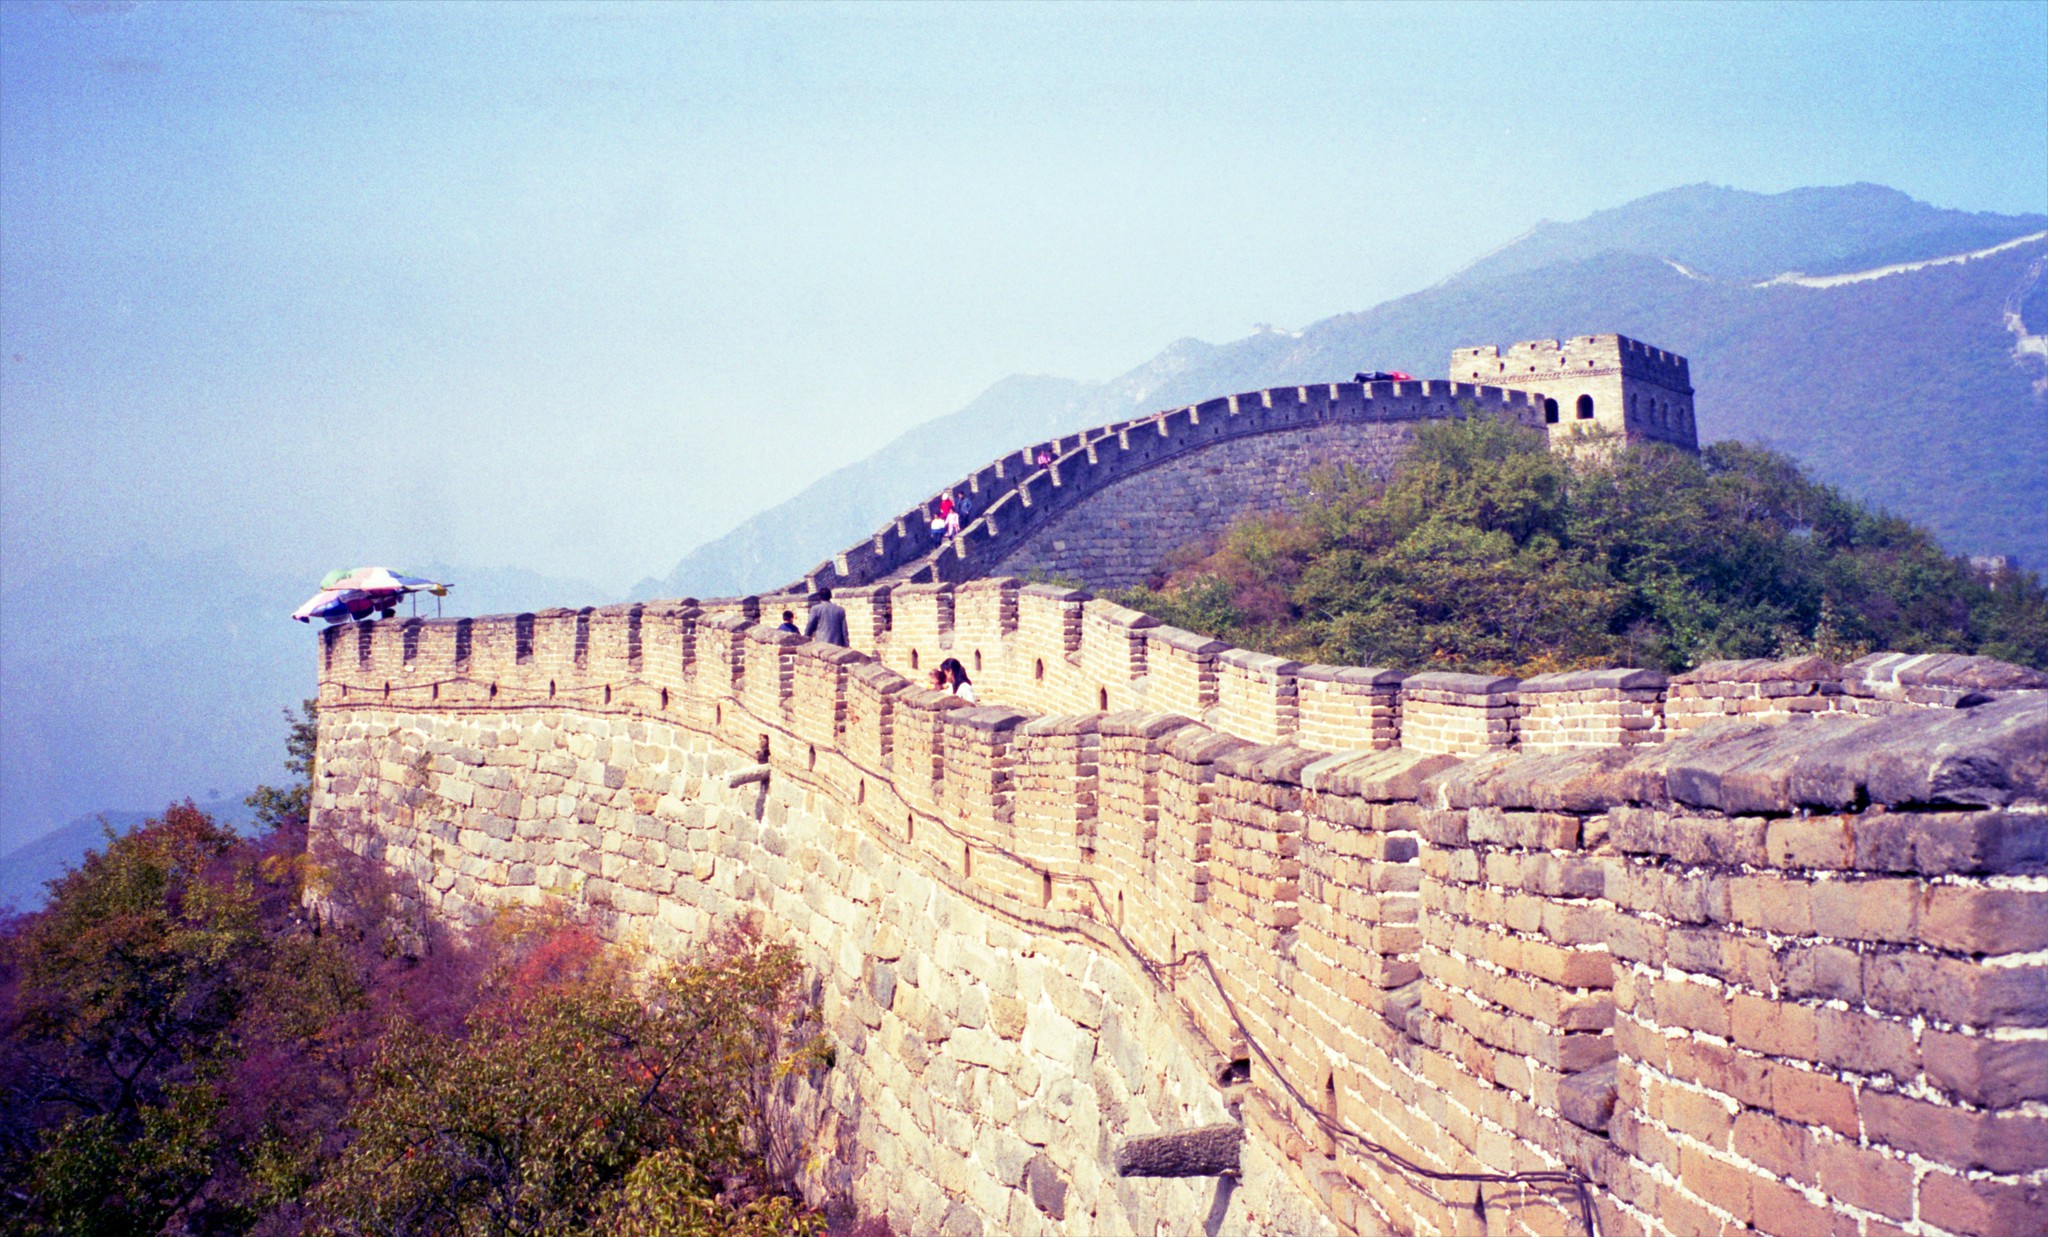 A small portion of the Great Wall of China, begun in the 8th century BC, which now stretches more than 20,000 kilometers (13,171 miles) across China's historical northern border. November 30, 2020 (Photo by "found_in_a_attic") Creative commons license via Flickr